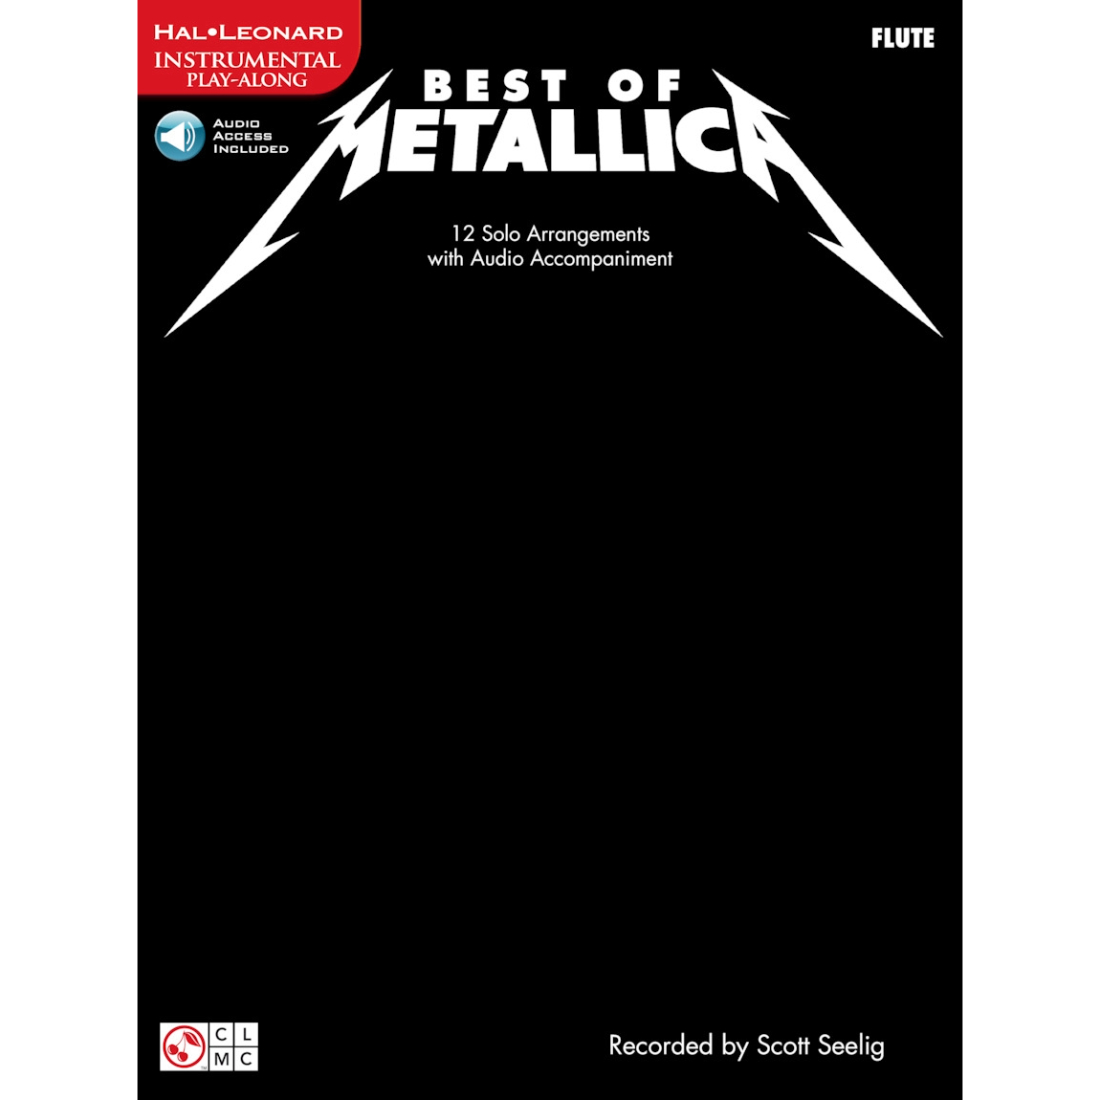 Solid black cover song book, titled Best of Metallica